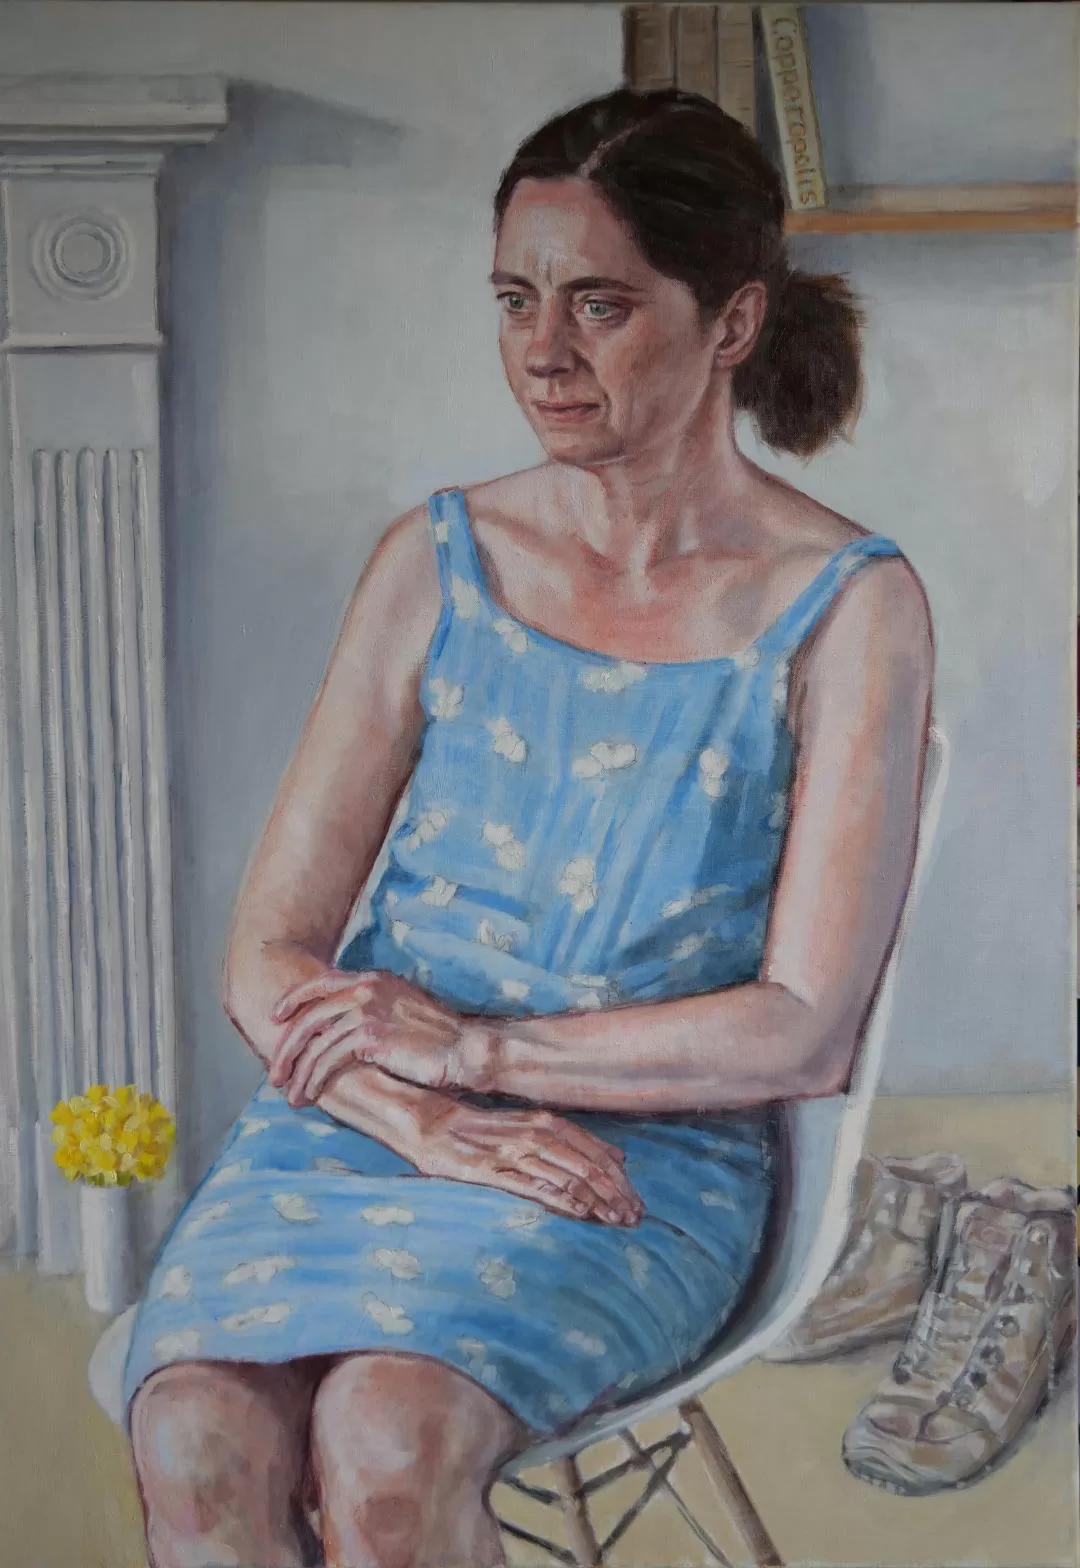 commissioned portrait painting of woman in blue dress sitting on a chair